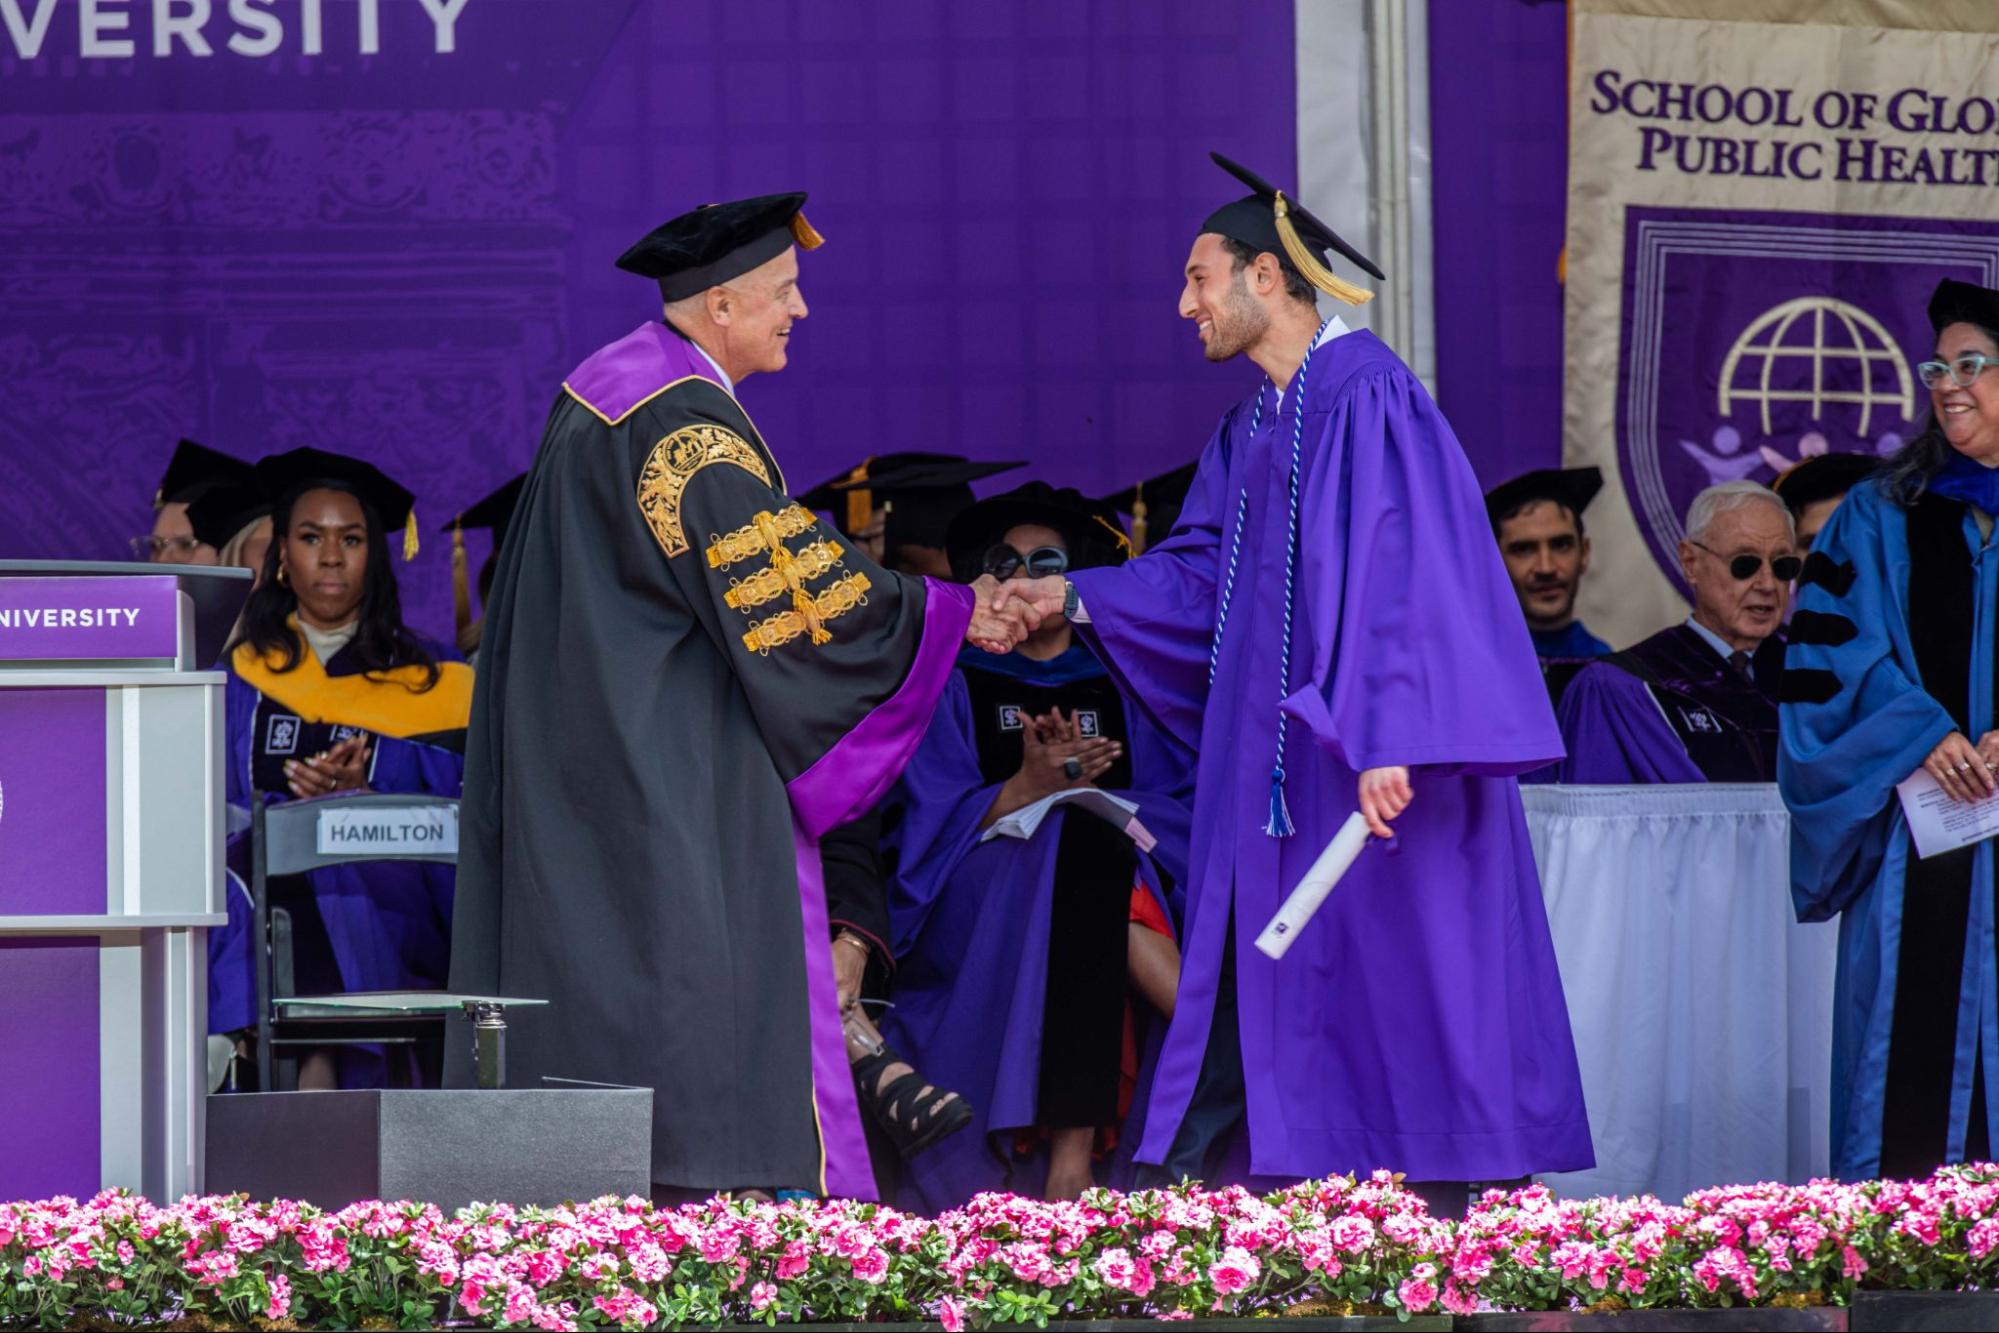 Fertig crossing the NYU graduation stage and shaking hands with the NYU President Andrew Hamilton